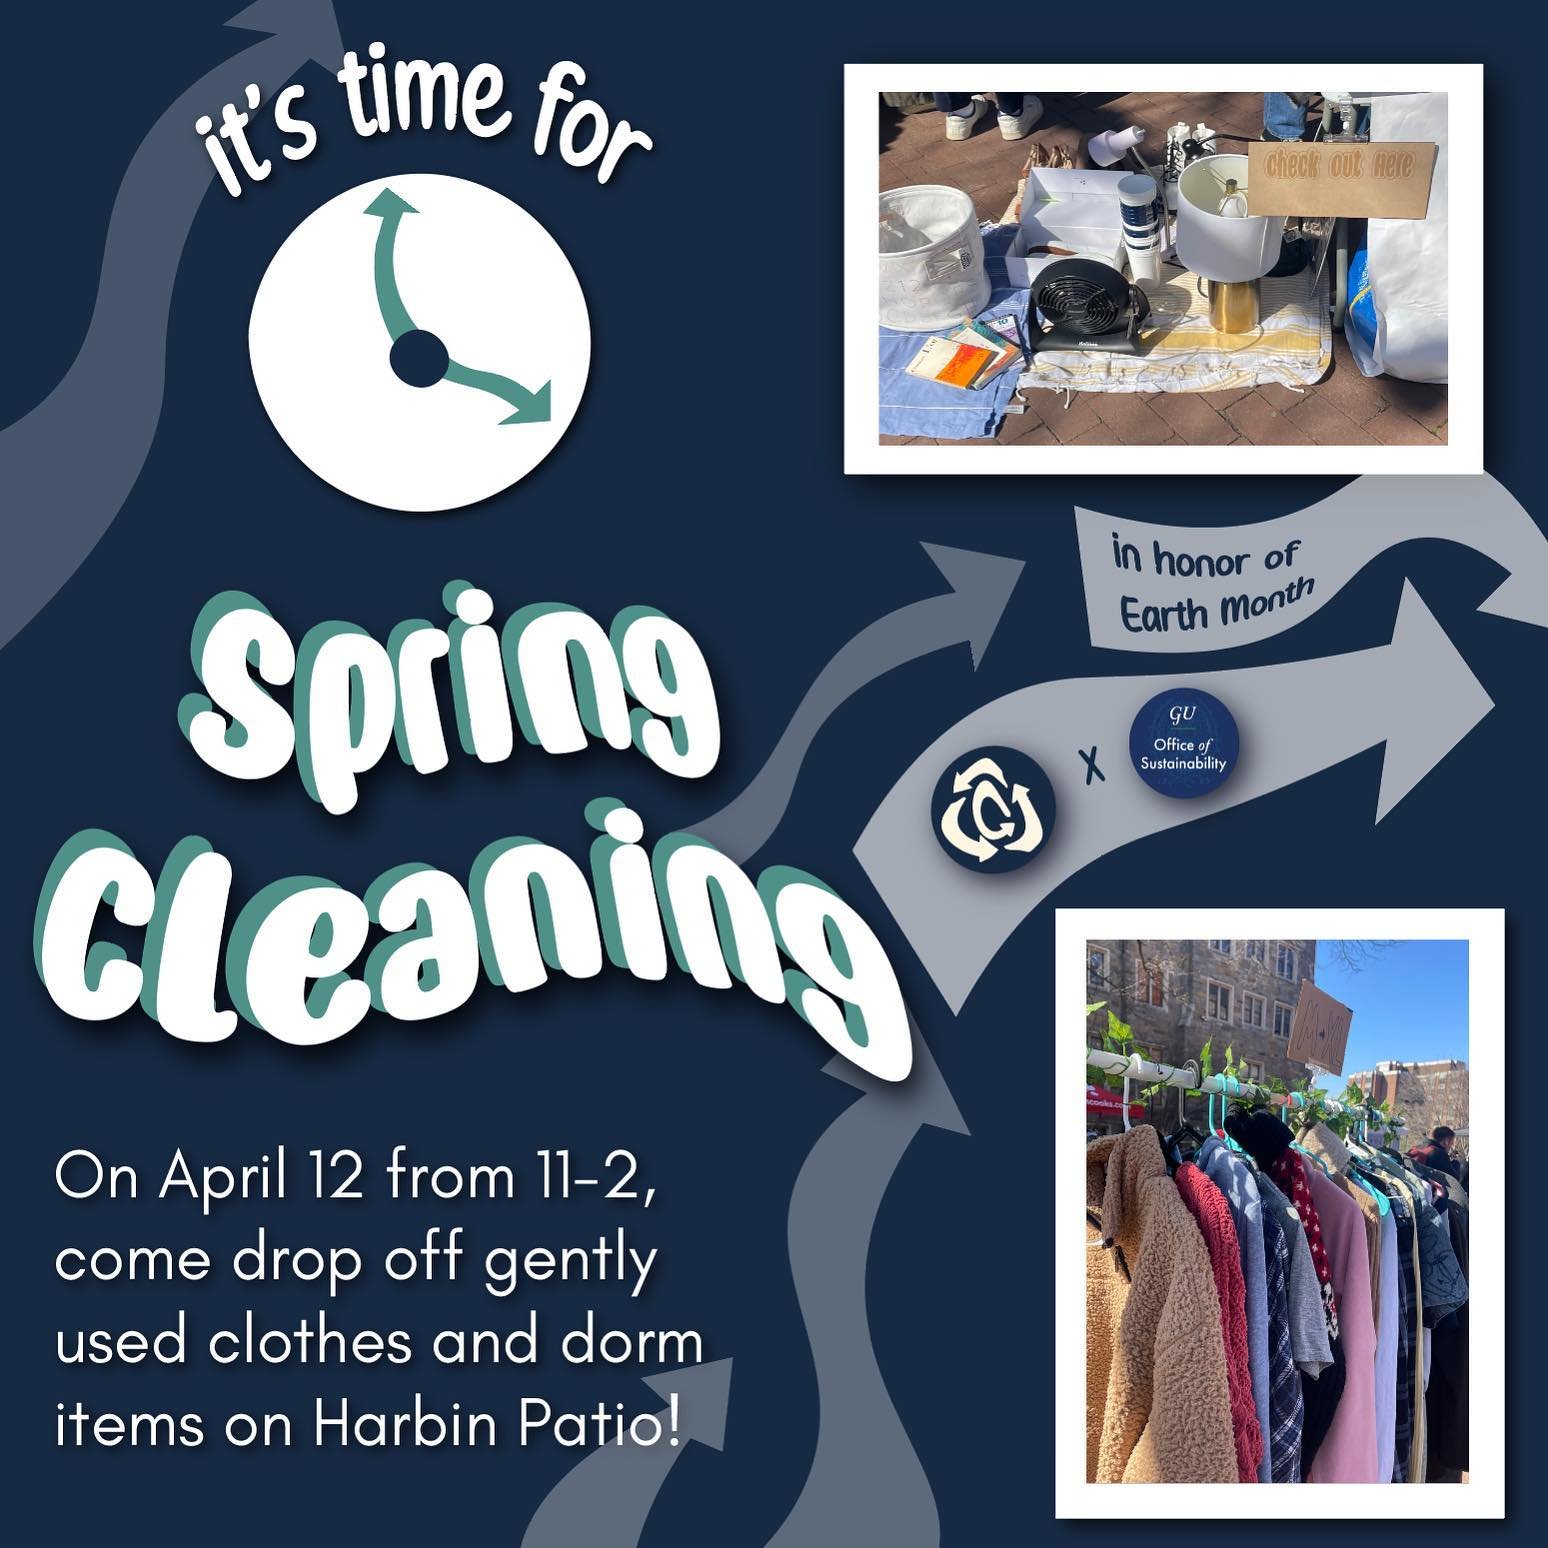 It&rsquo;s looking like spring and you know what that means - time for SPRING CLEANING. Take some time to clear out your closets and dorms before the stress of finals - we&rsquo;ll be collecting your donations at a special drive this Friday on Harbin